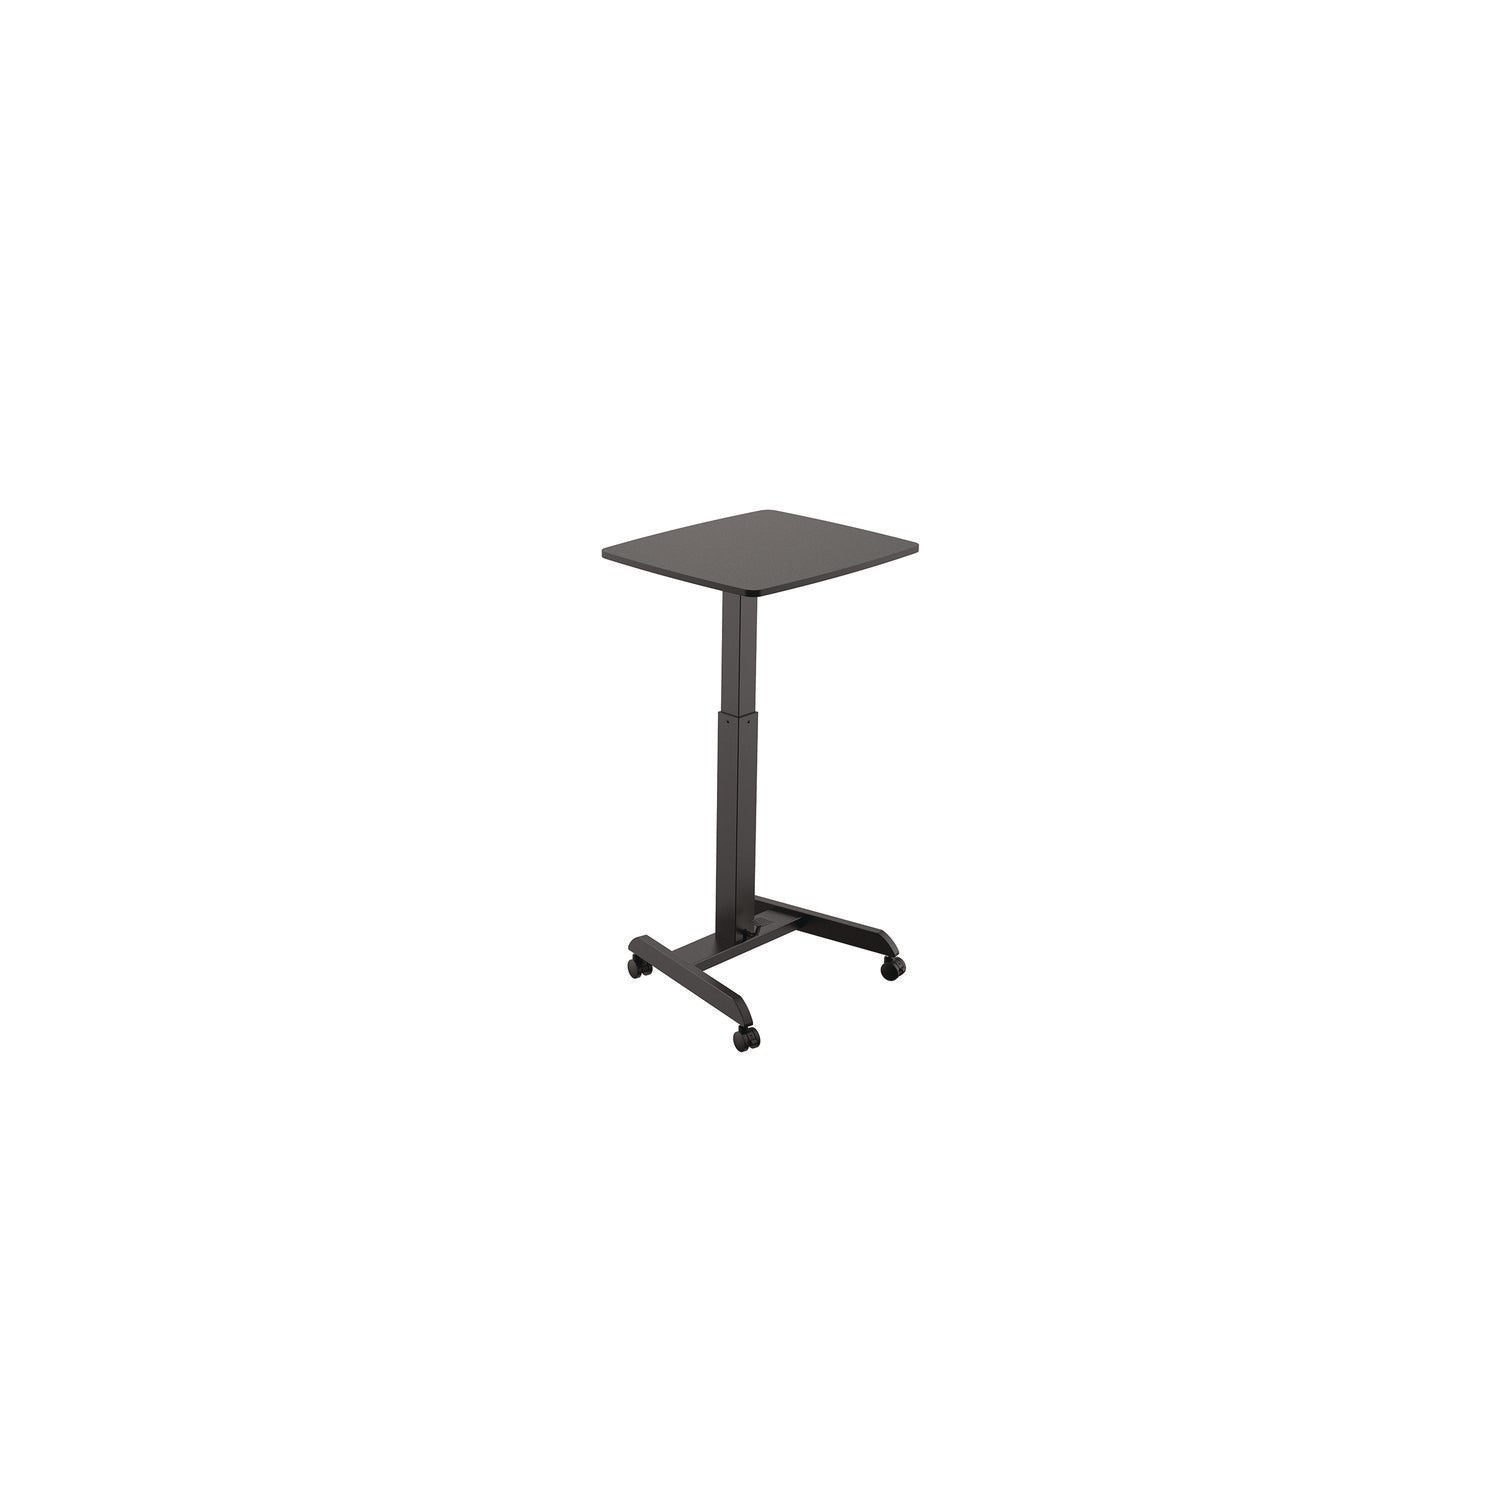 mobile-sit-to-stand-desk-235-x-205-x-2975-to-4425-black_ktksts300b - 1